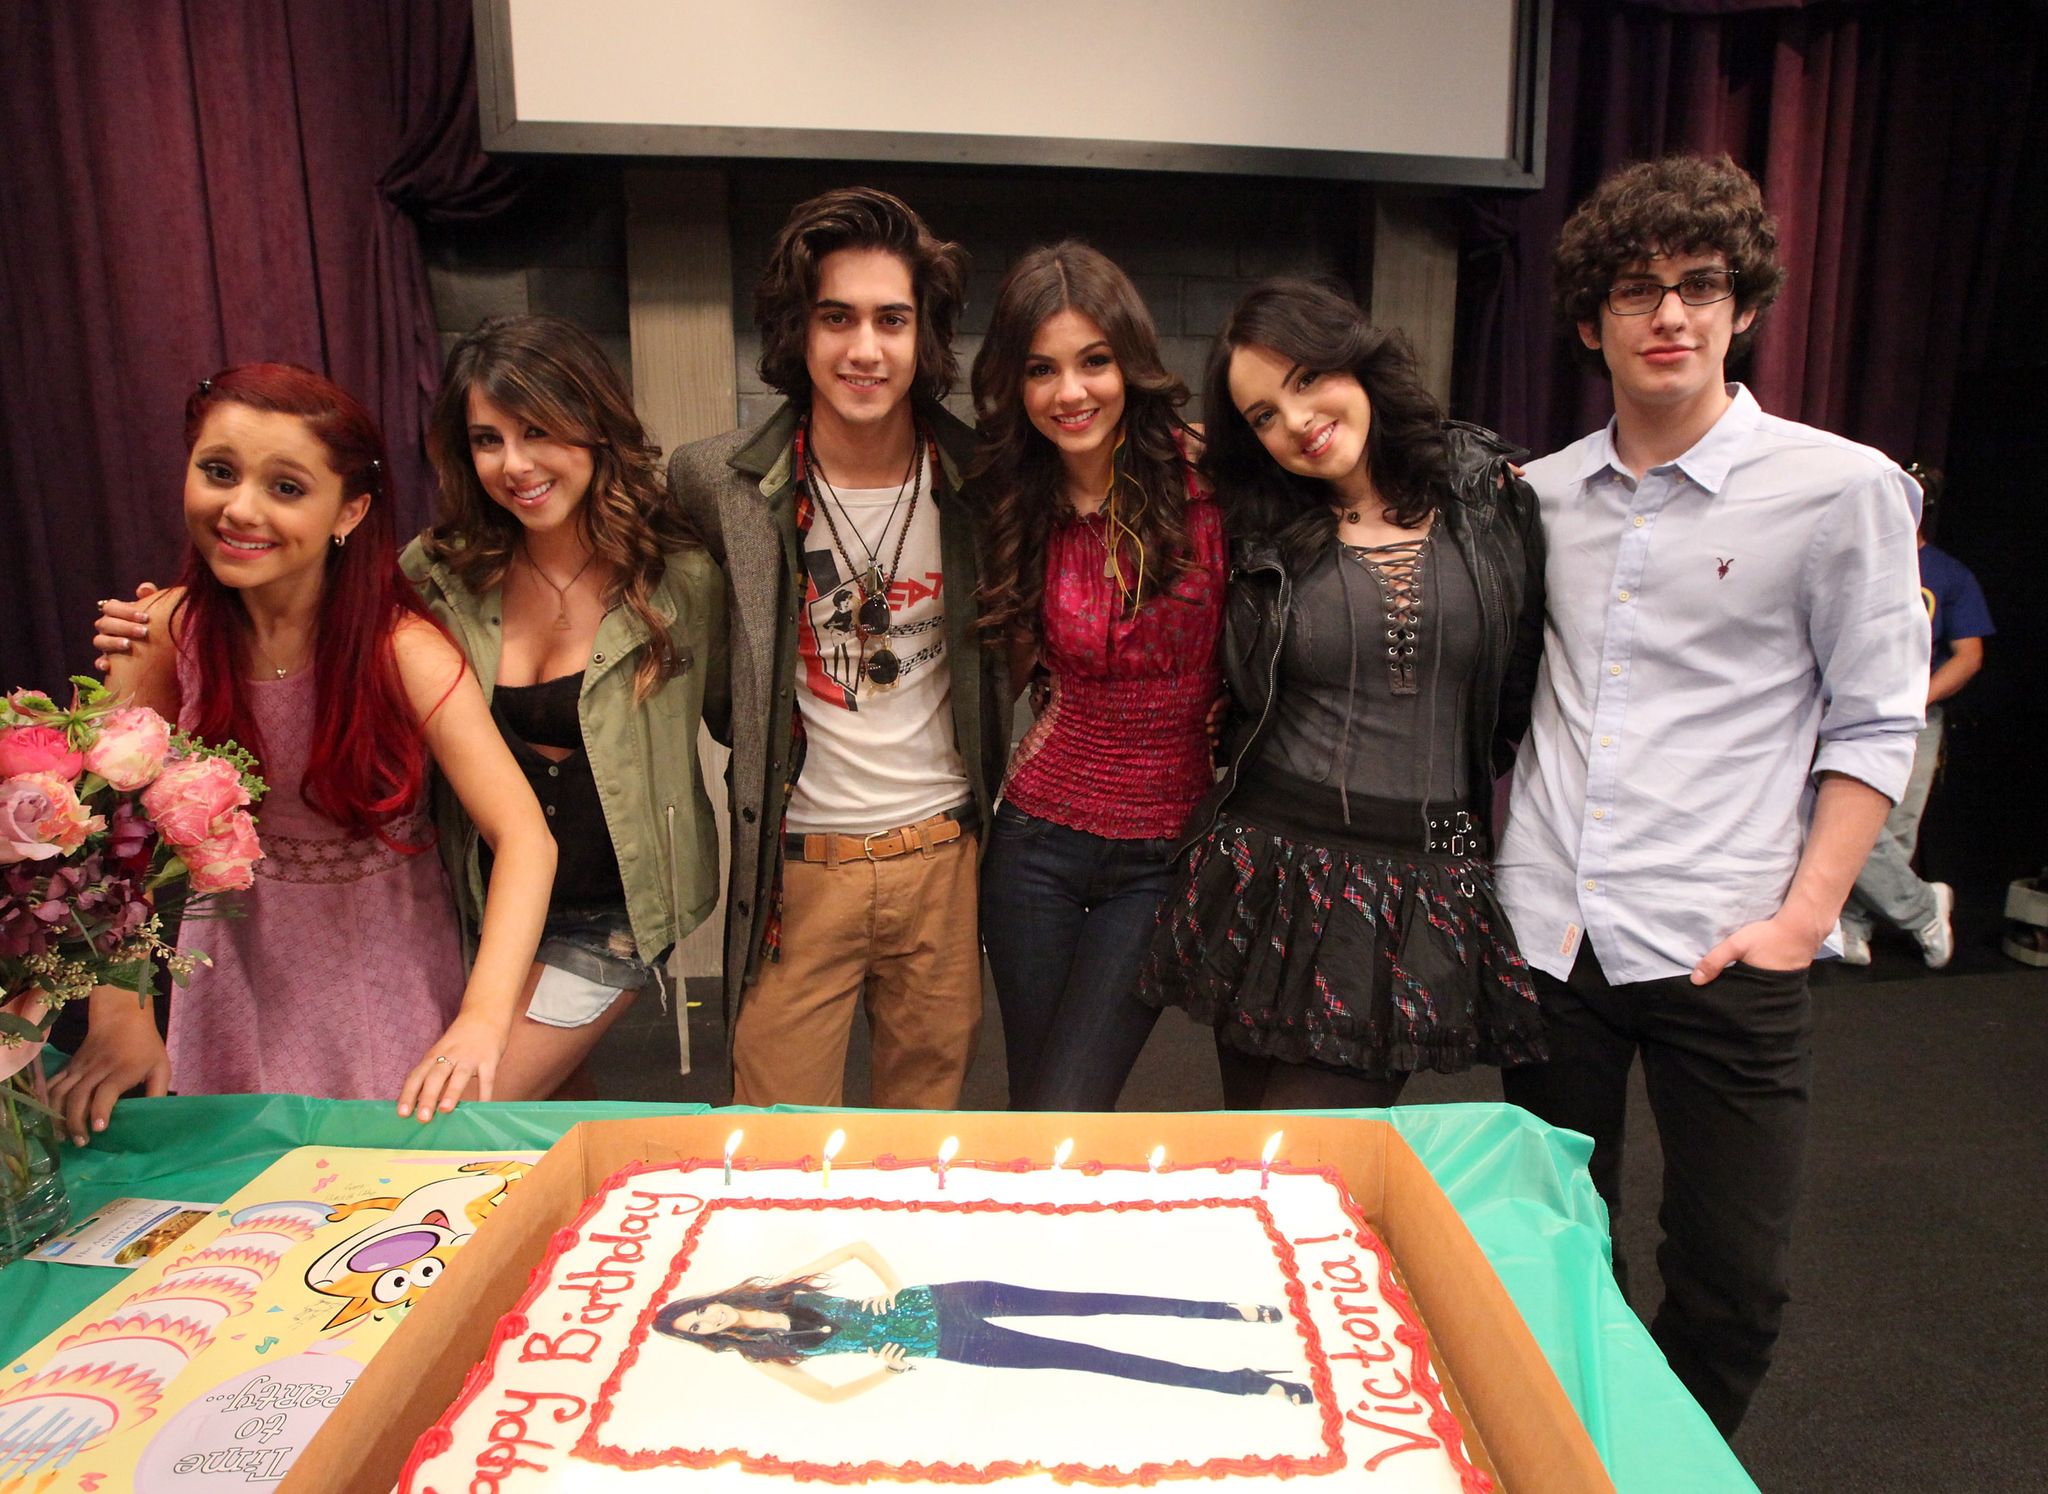 Victorious Cast Then and Now 2023 (Victorious Before and After